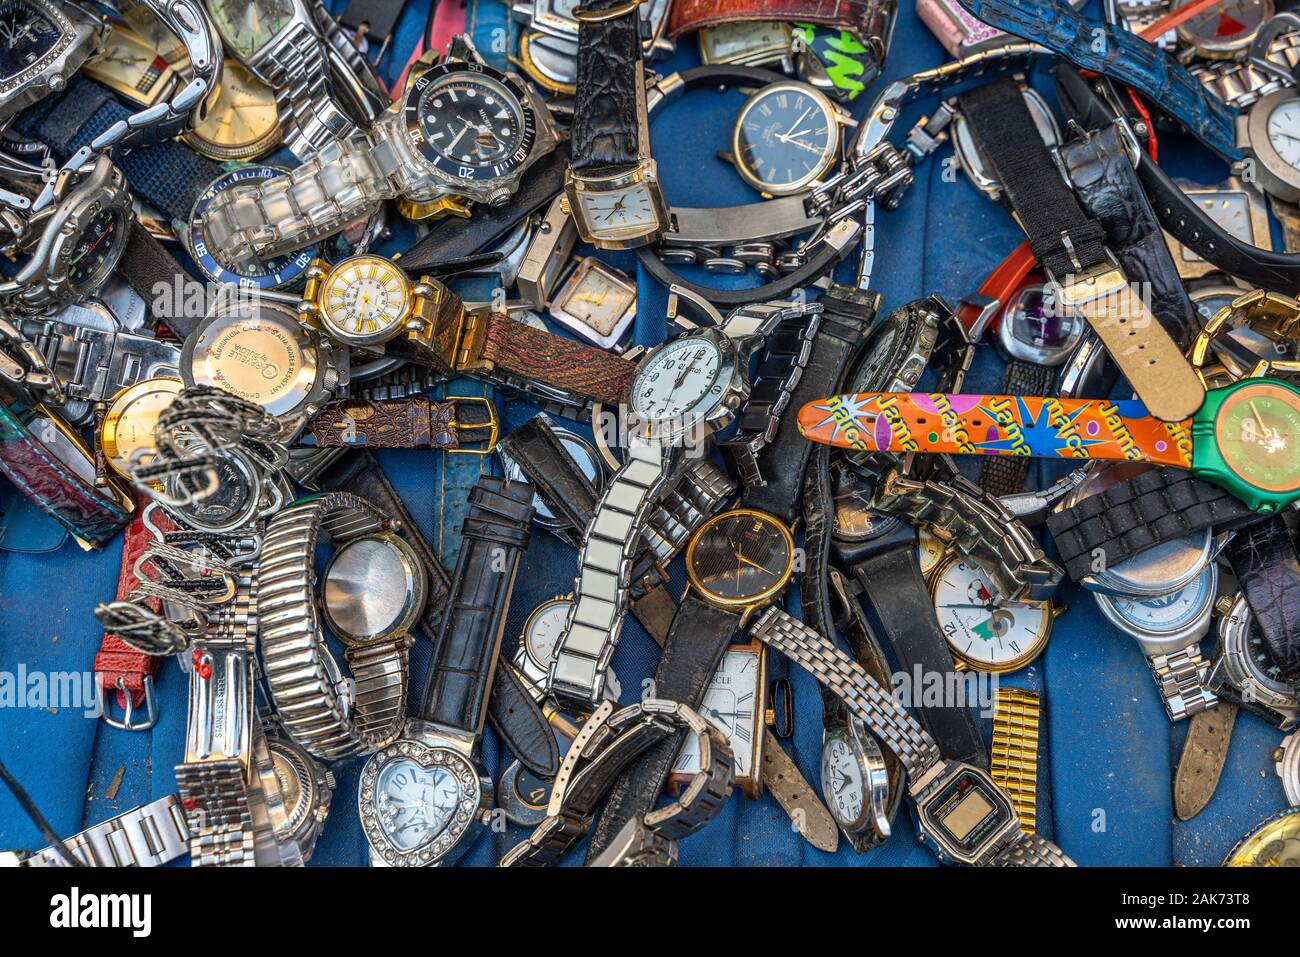 Second hand watches for sale at flea market Stock Photo